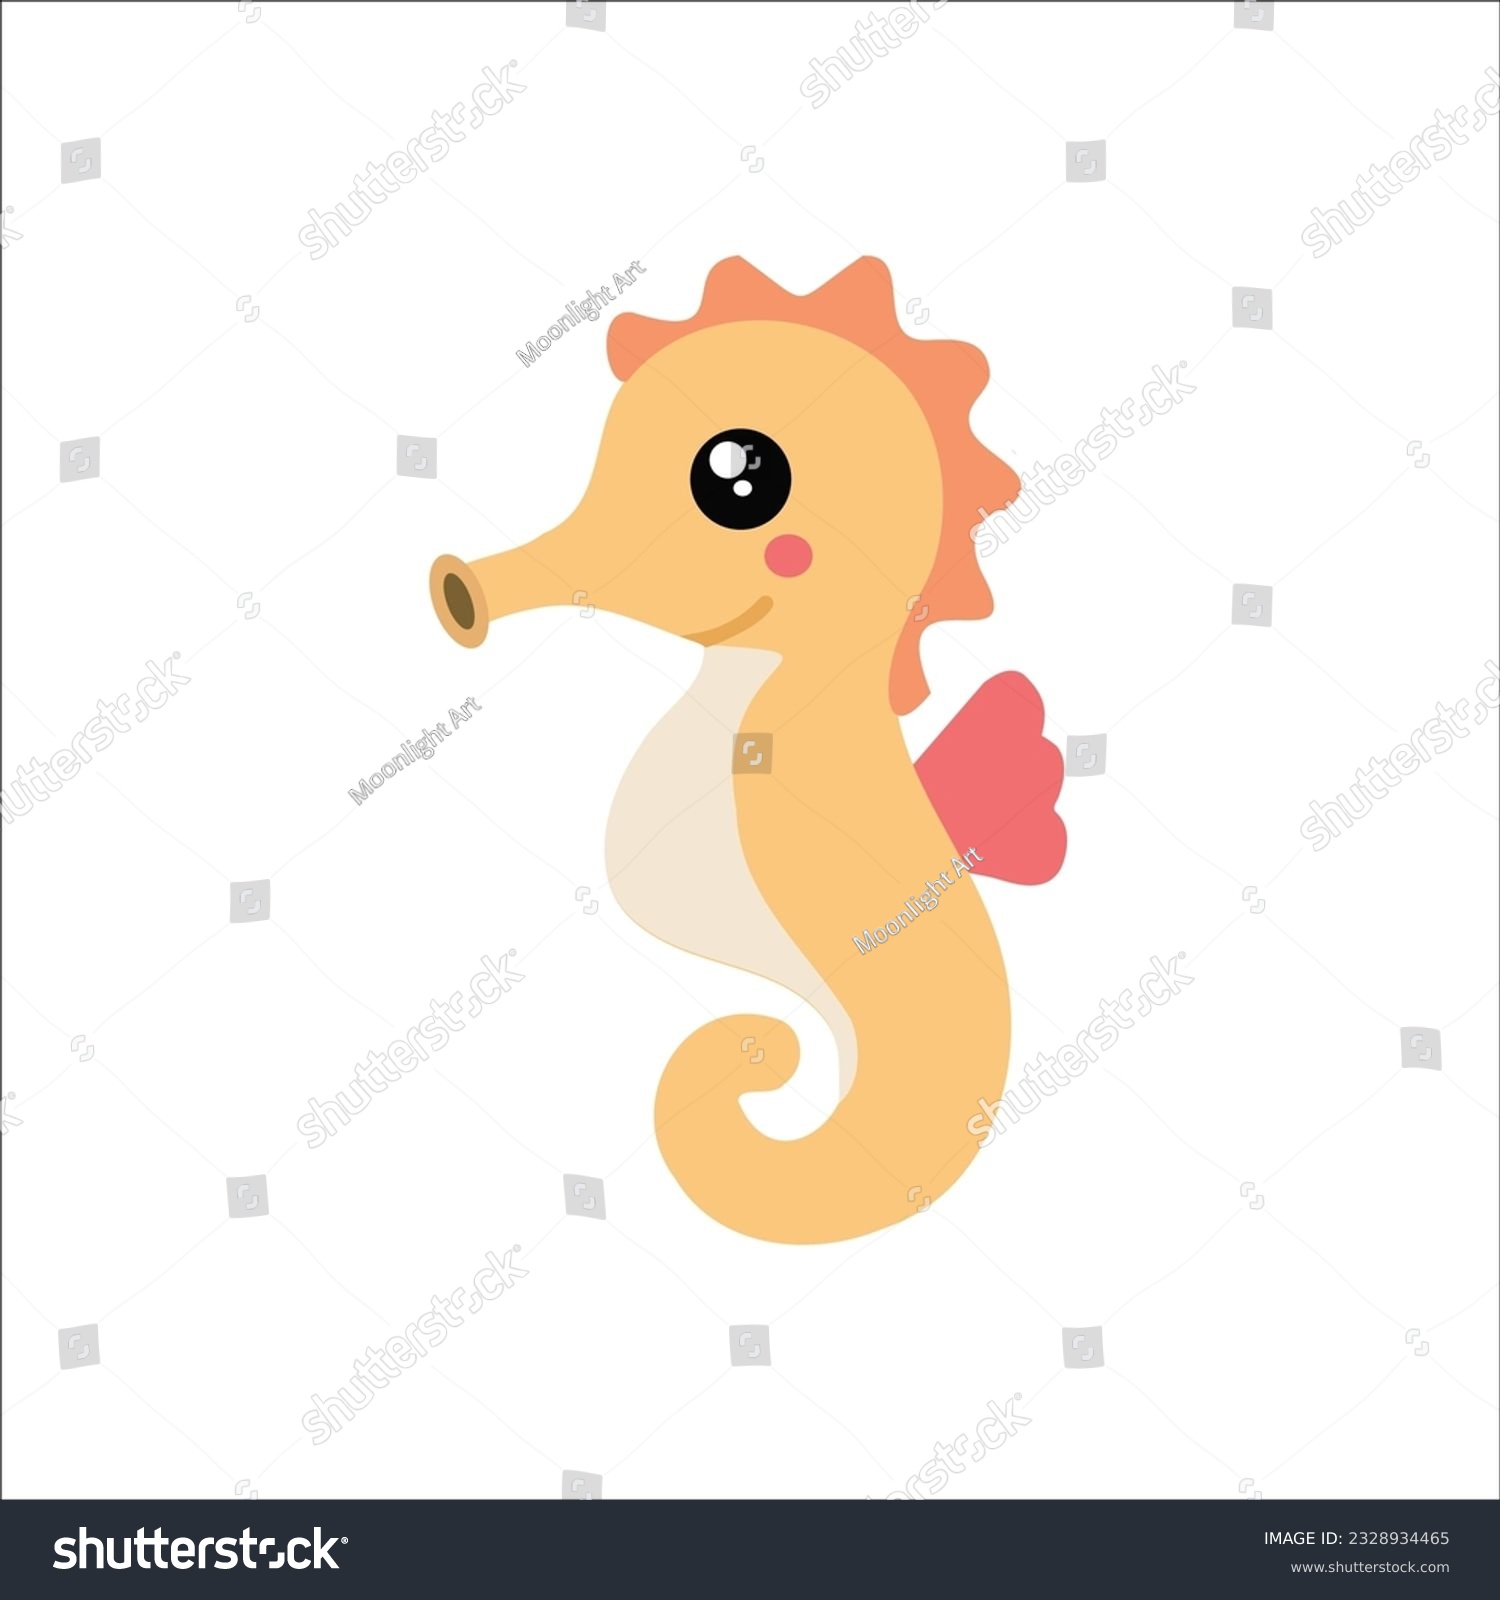 SVG of Cute Seahorse SVG, Digital download Cricut, Silhouette, Cut Files, Layered, Cartoon clipart, Great for nursery or baby shower, Svg Files for Cricut
 svg